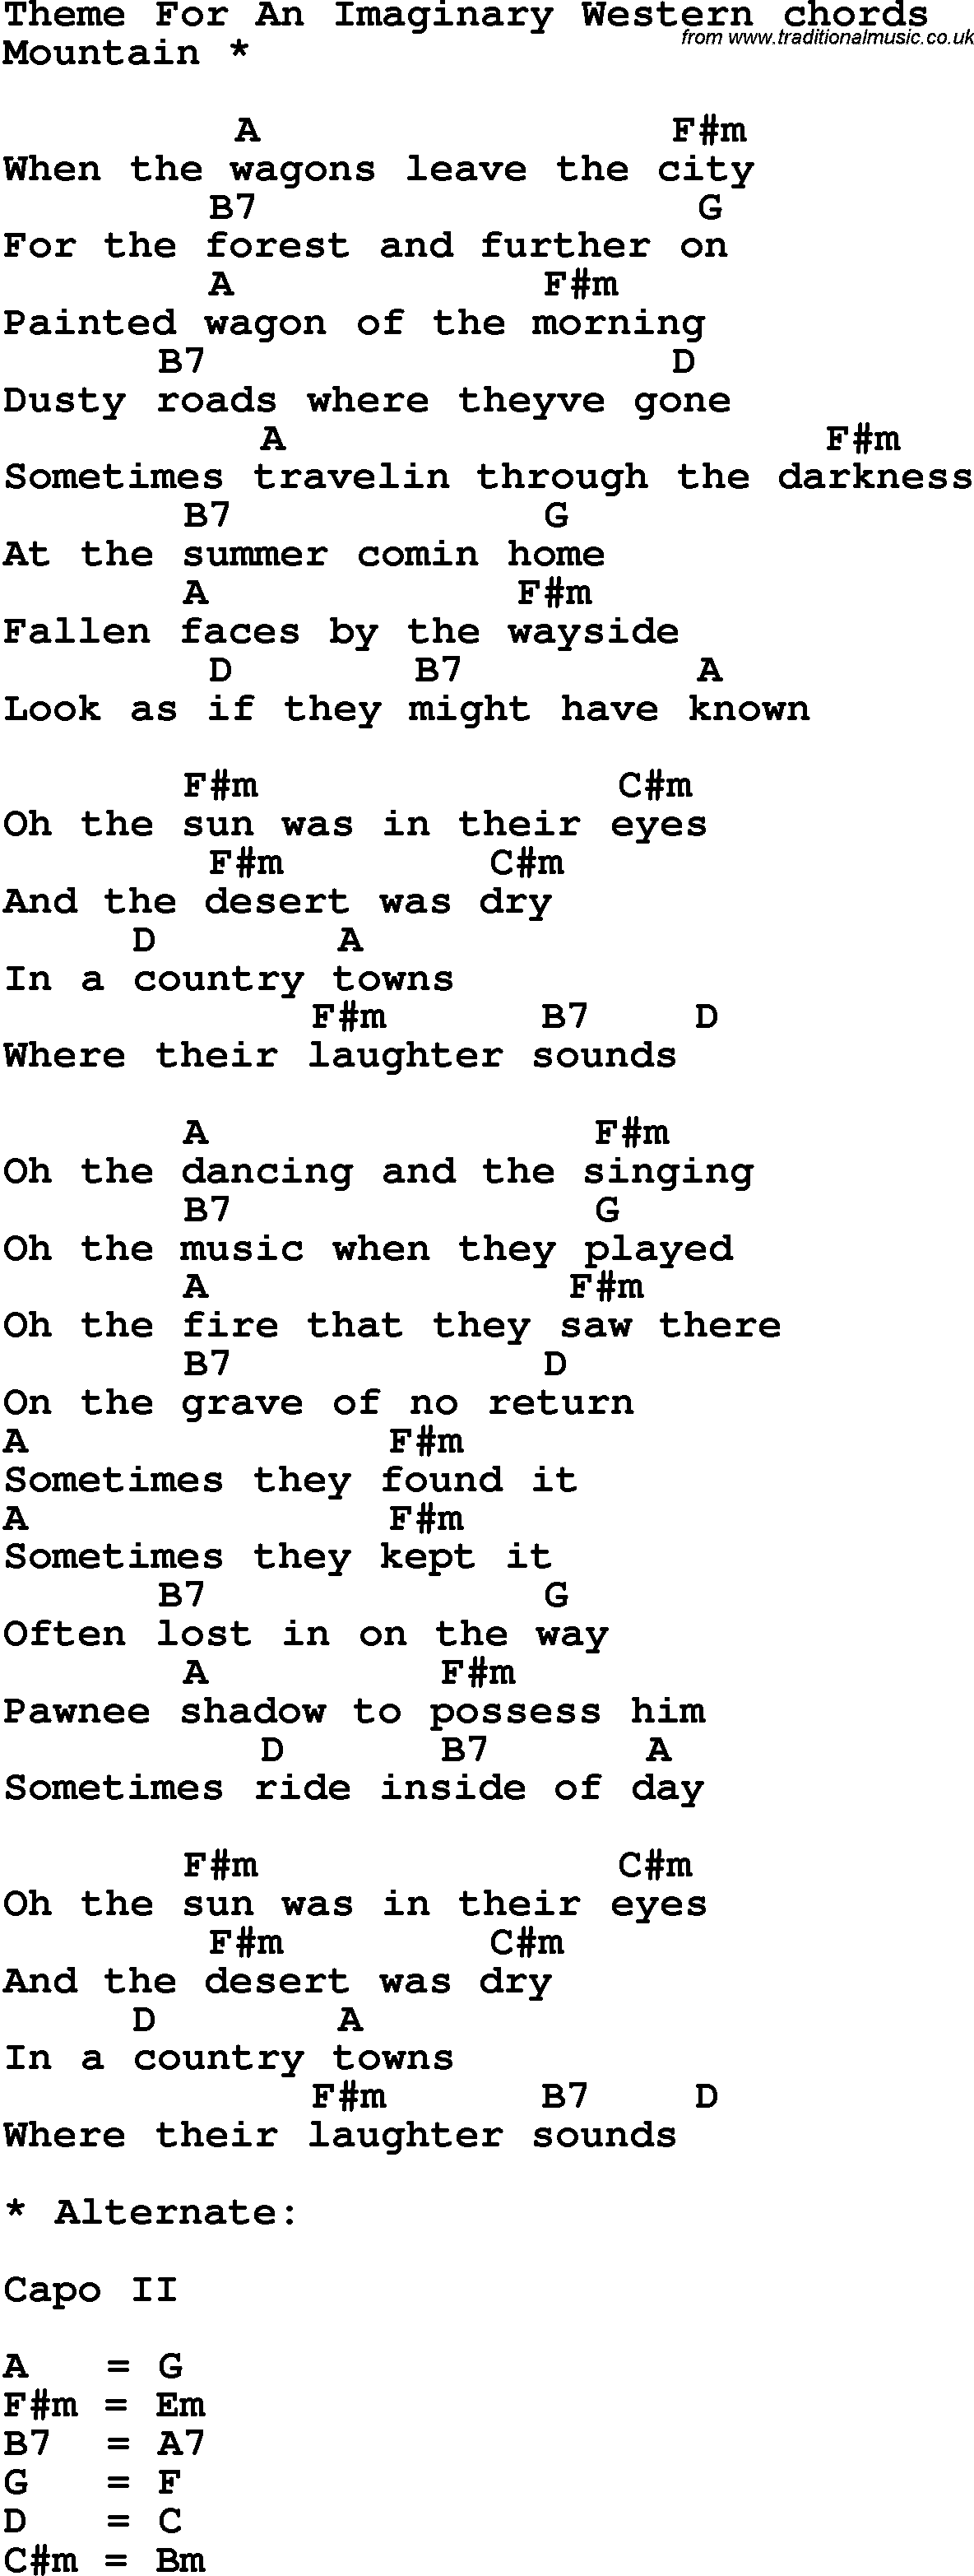 Song Lyrics with guitar chords for Theme For An Imaginary Western